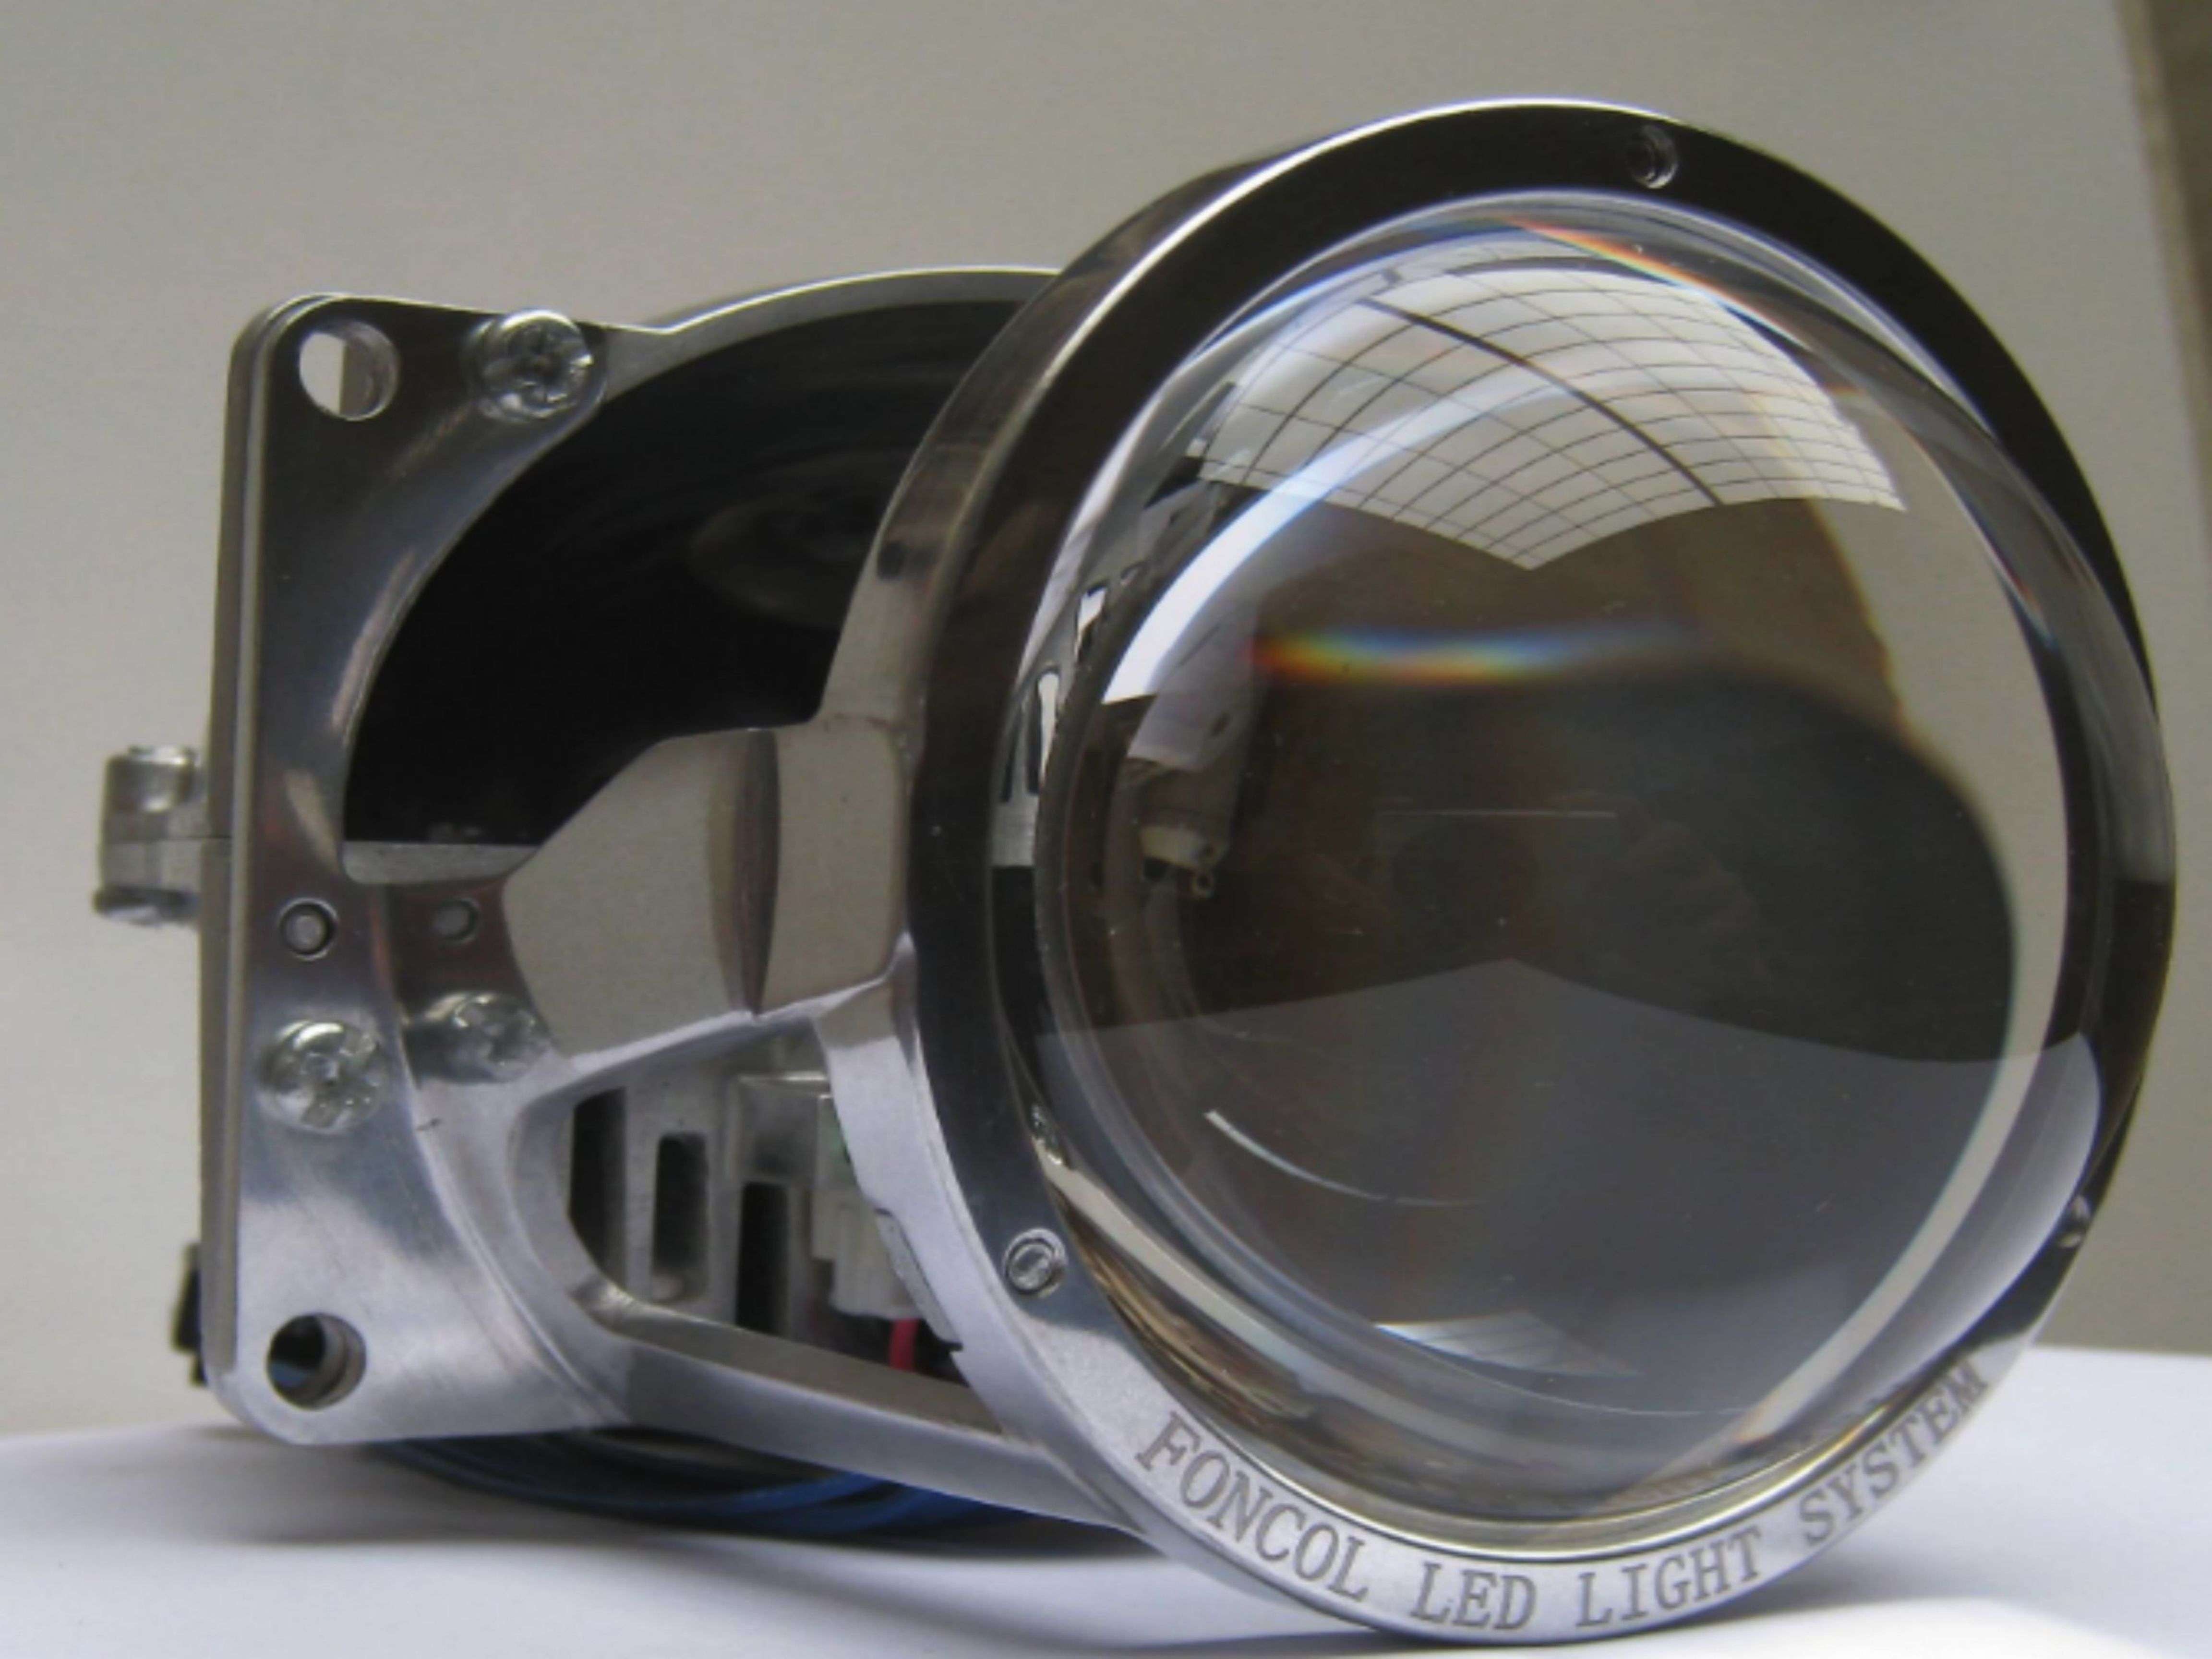 What is the cleaning process before acrylic optical lens coating